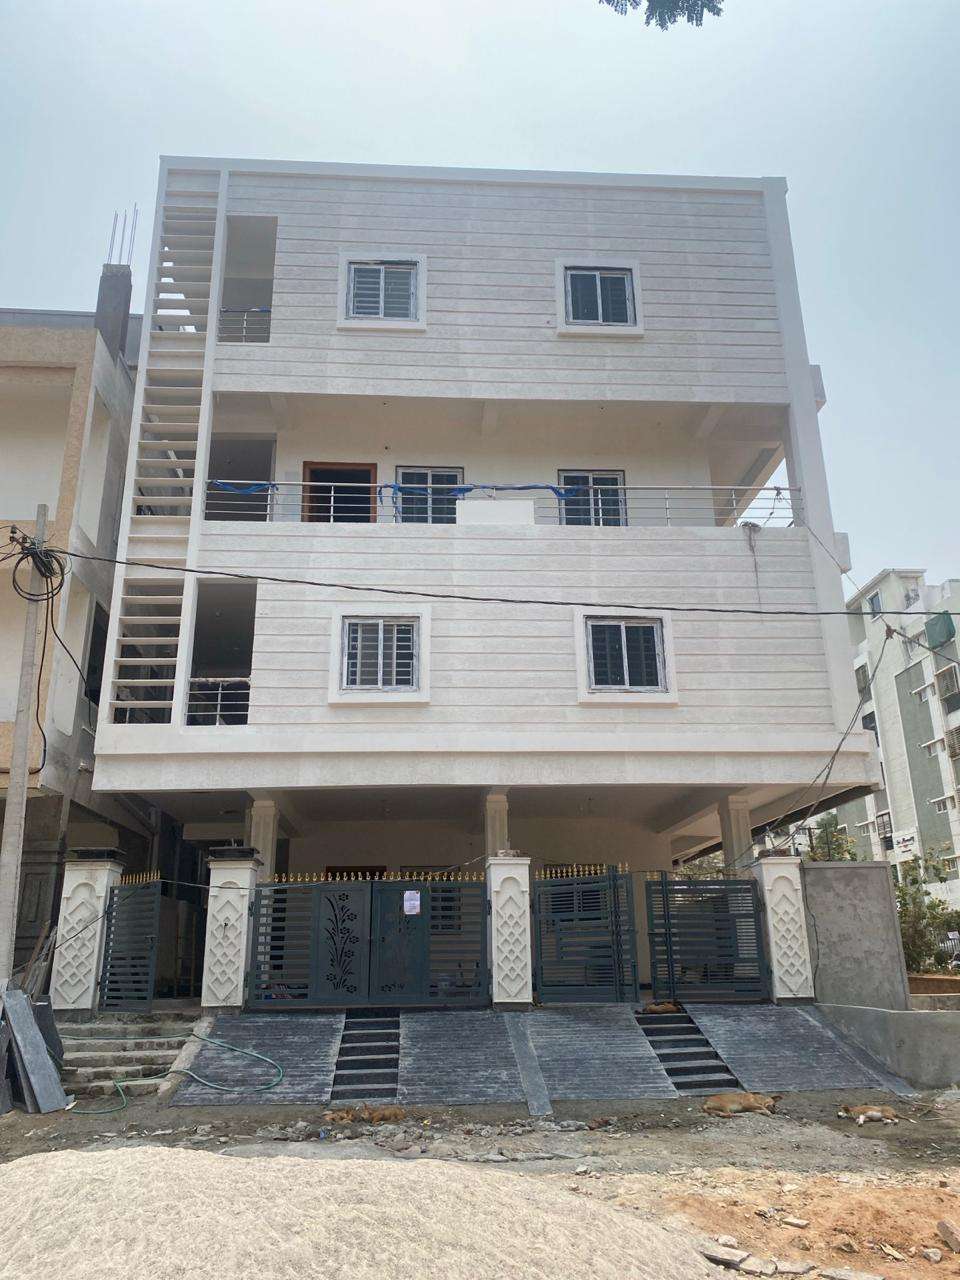 2 BHK Independent House For Rent in Bachupally Hyderabad 6653972